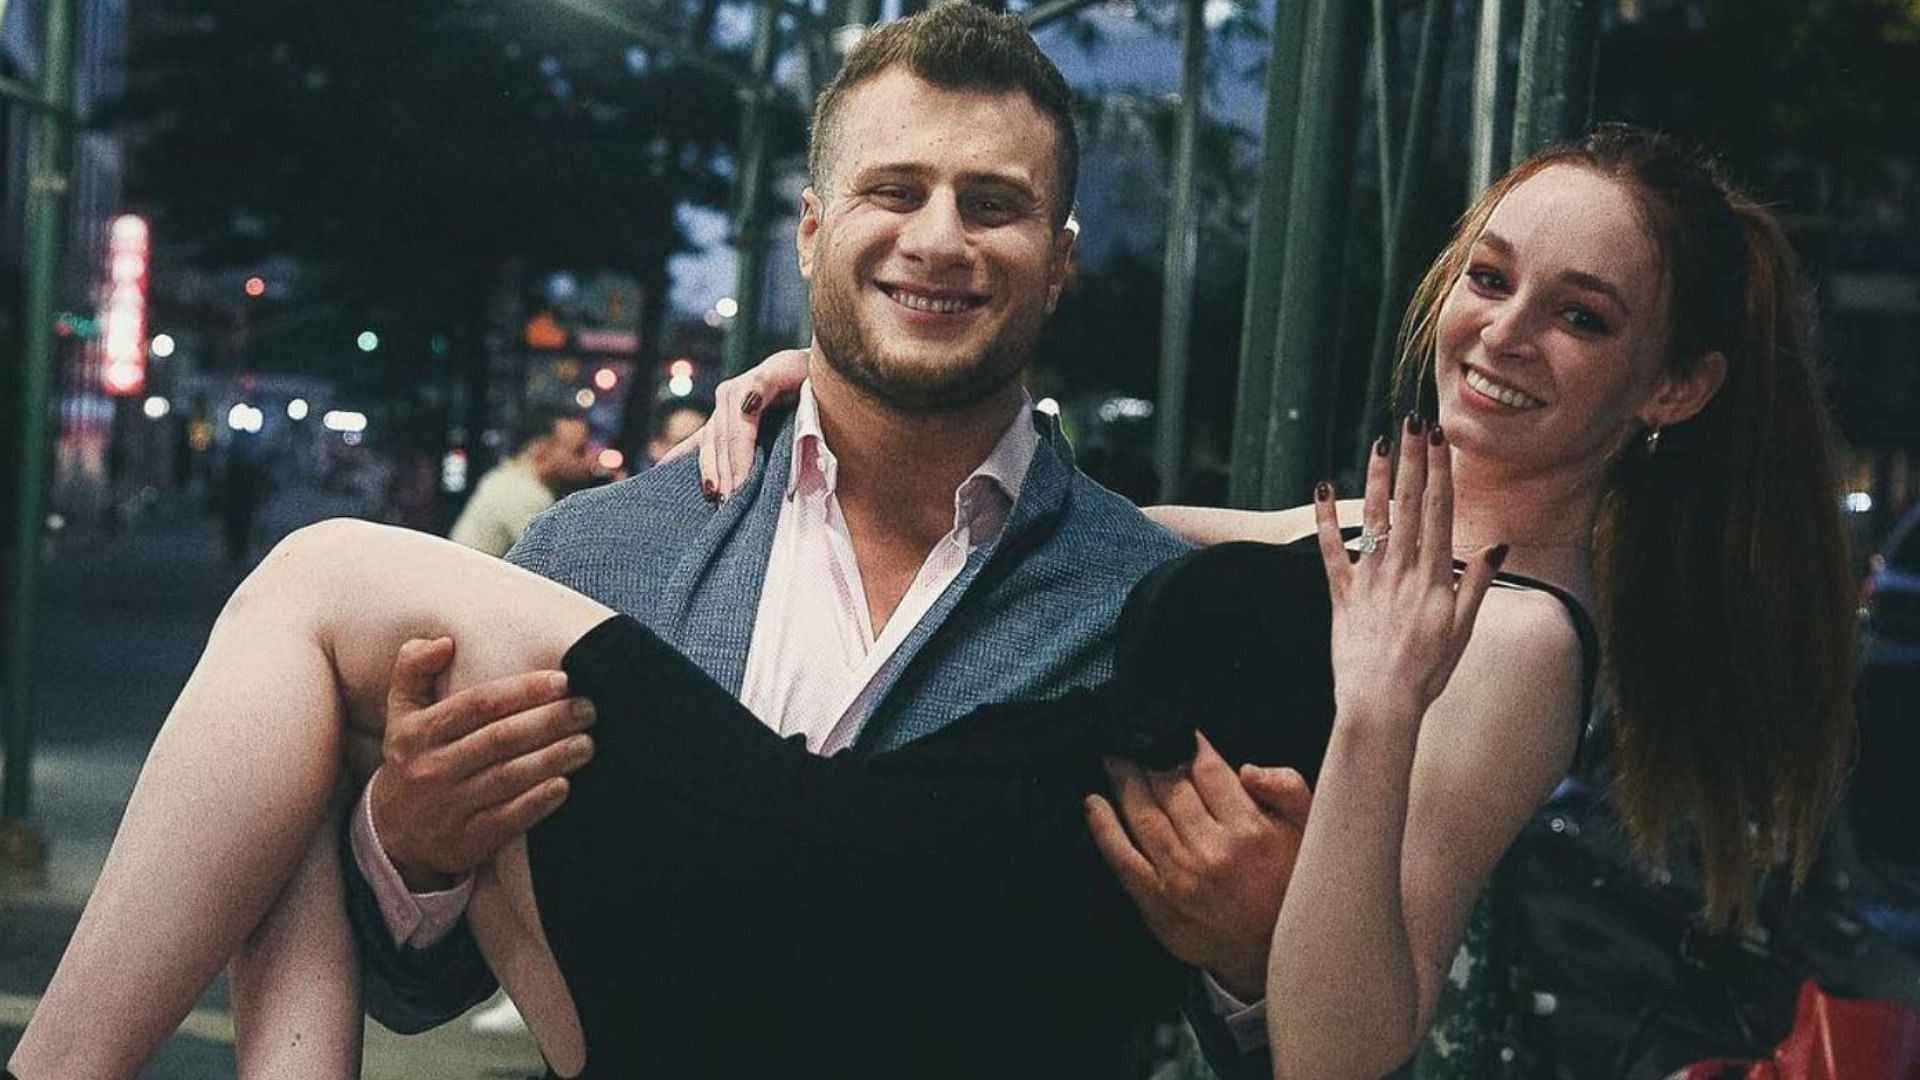 MJF and Naomi Rosenblum reportedly call off engagement after months